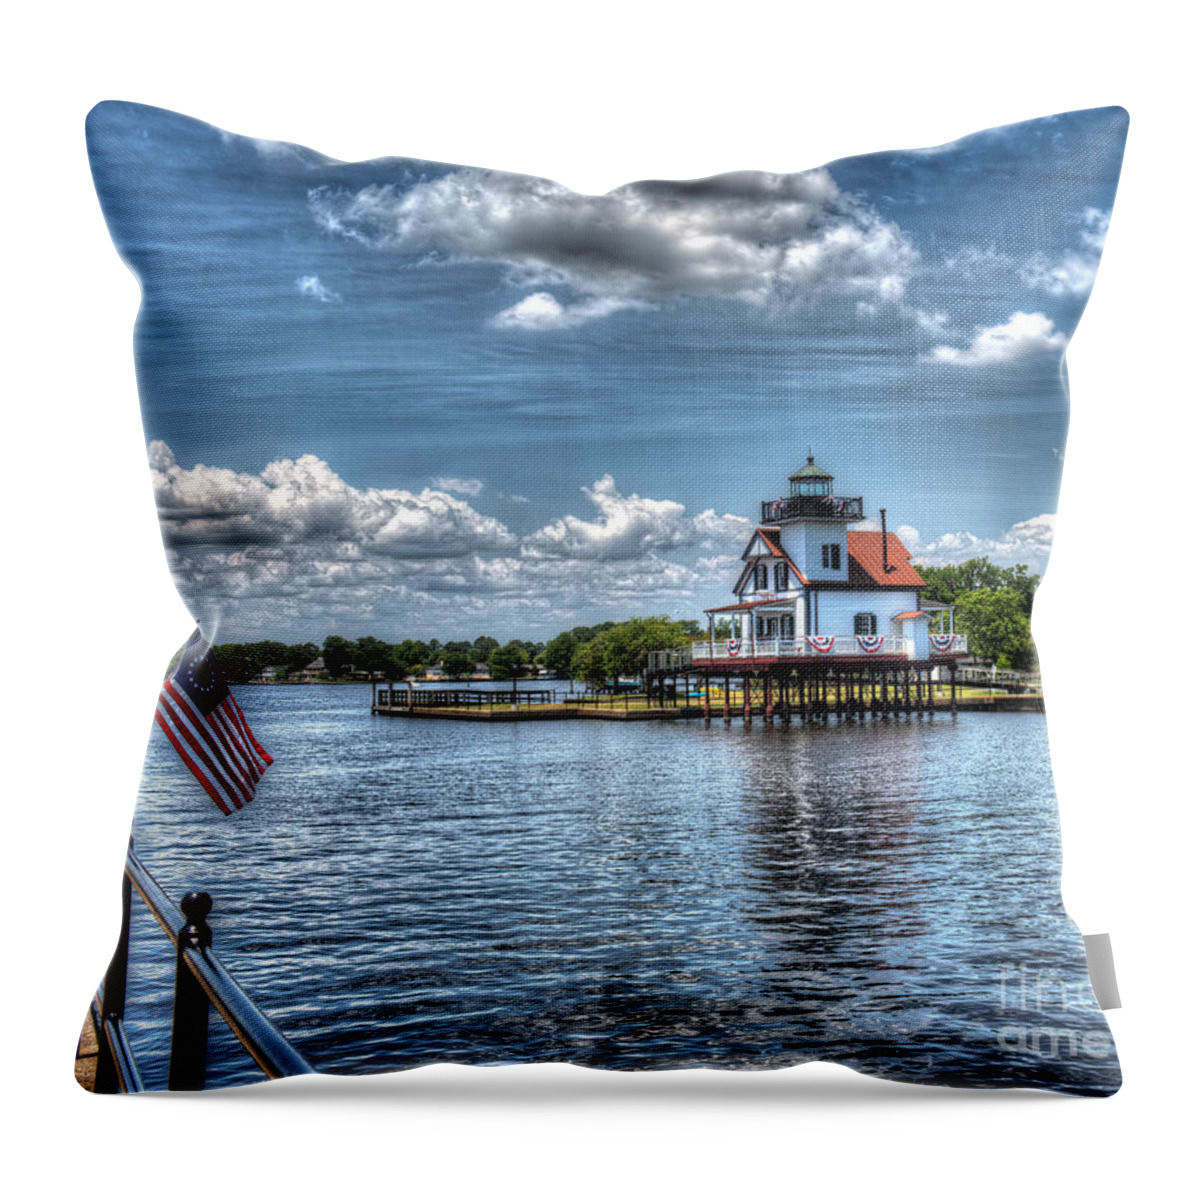 Roanoke River Lighthouse Throw Pillow featuring the photograph Roanoke River Lighthouse No. 2 by Greg Hager